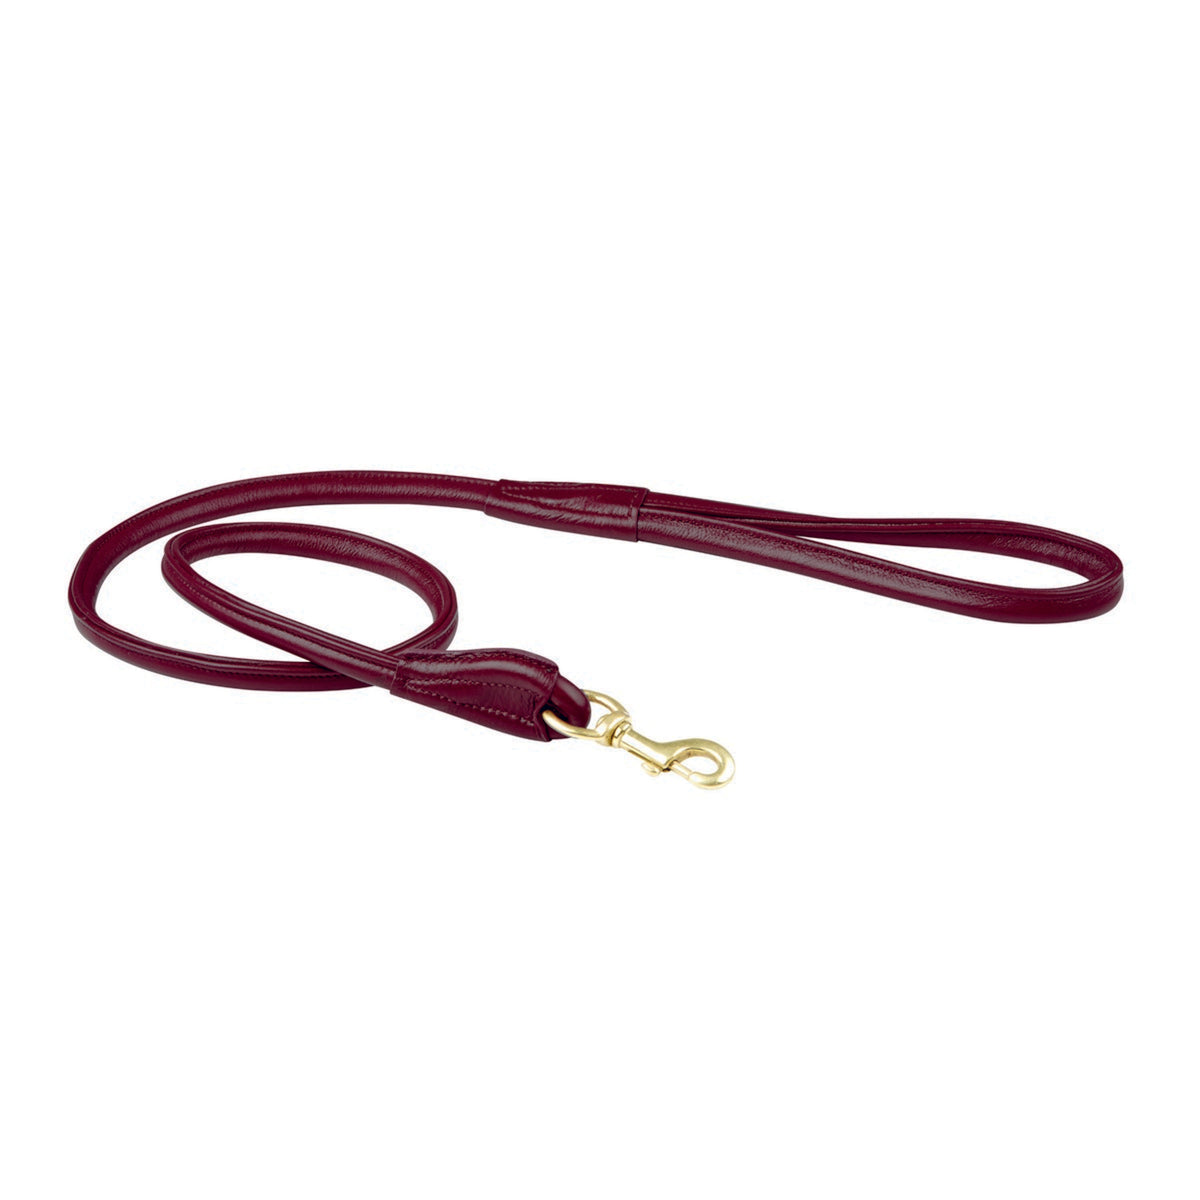 Weatherbeeta Laisse pour Chien Rolled Leather Maroon Red